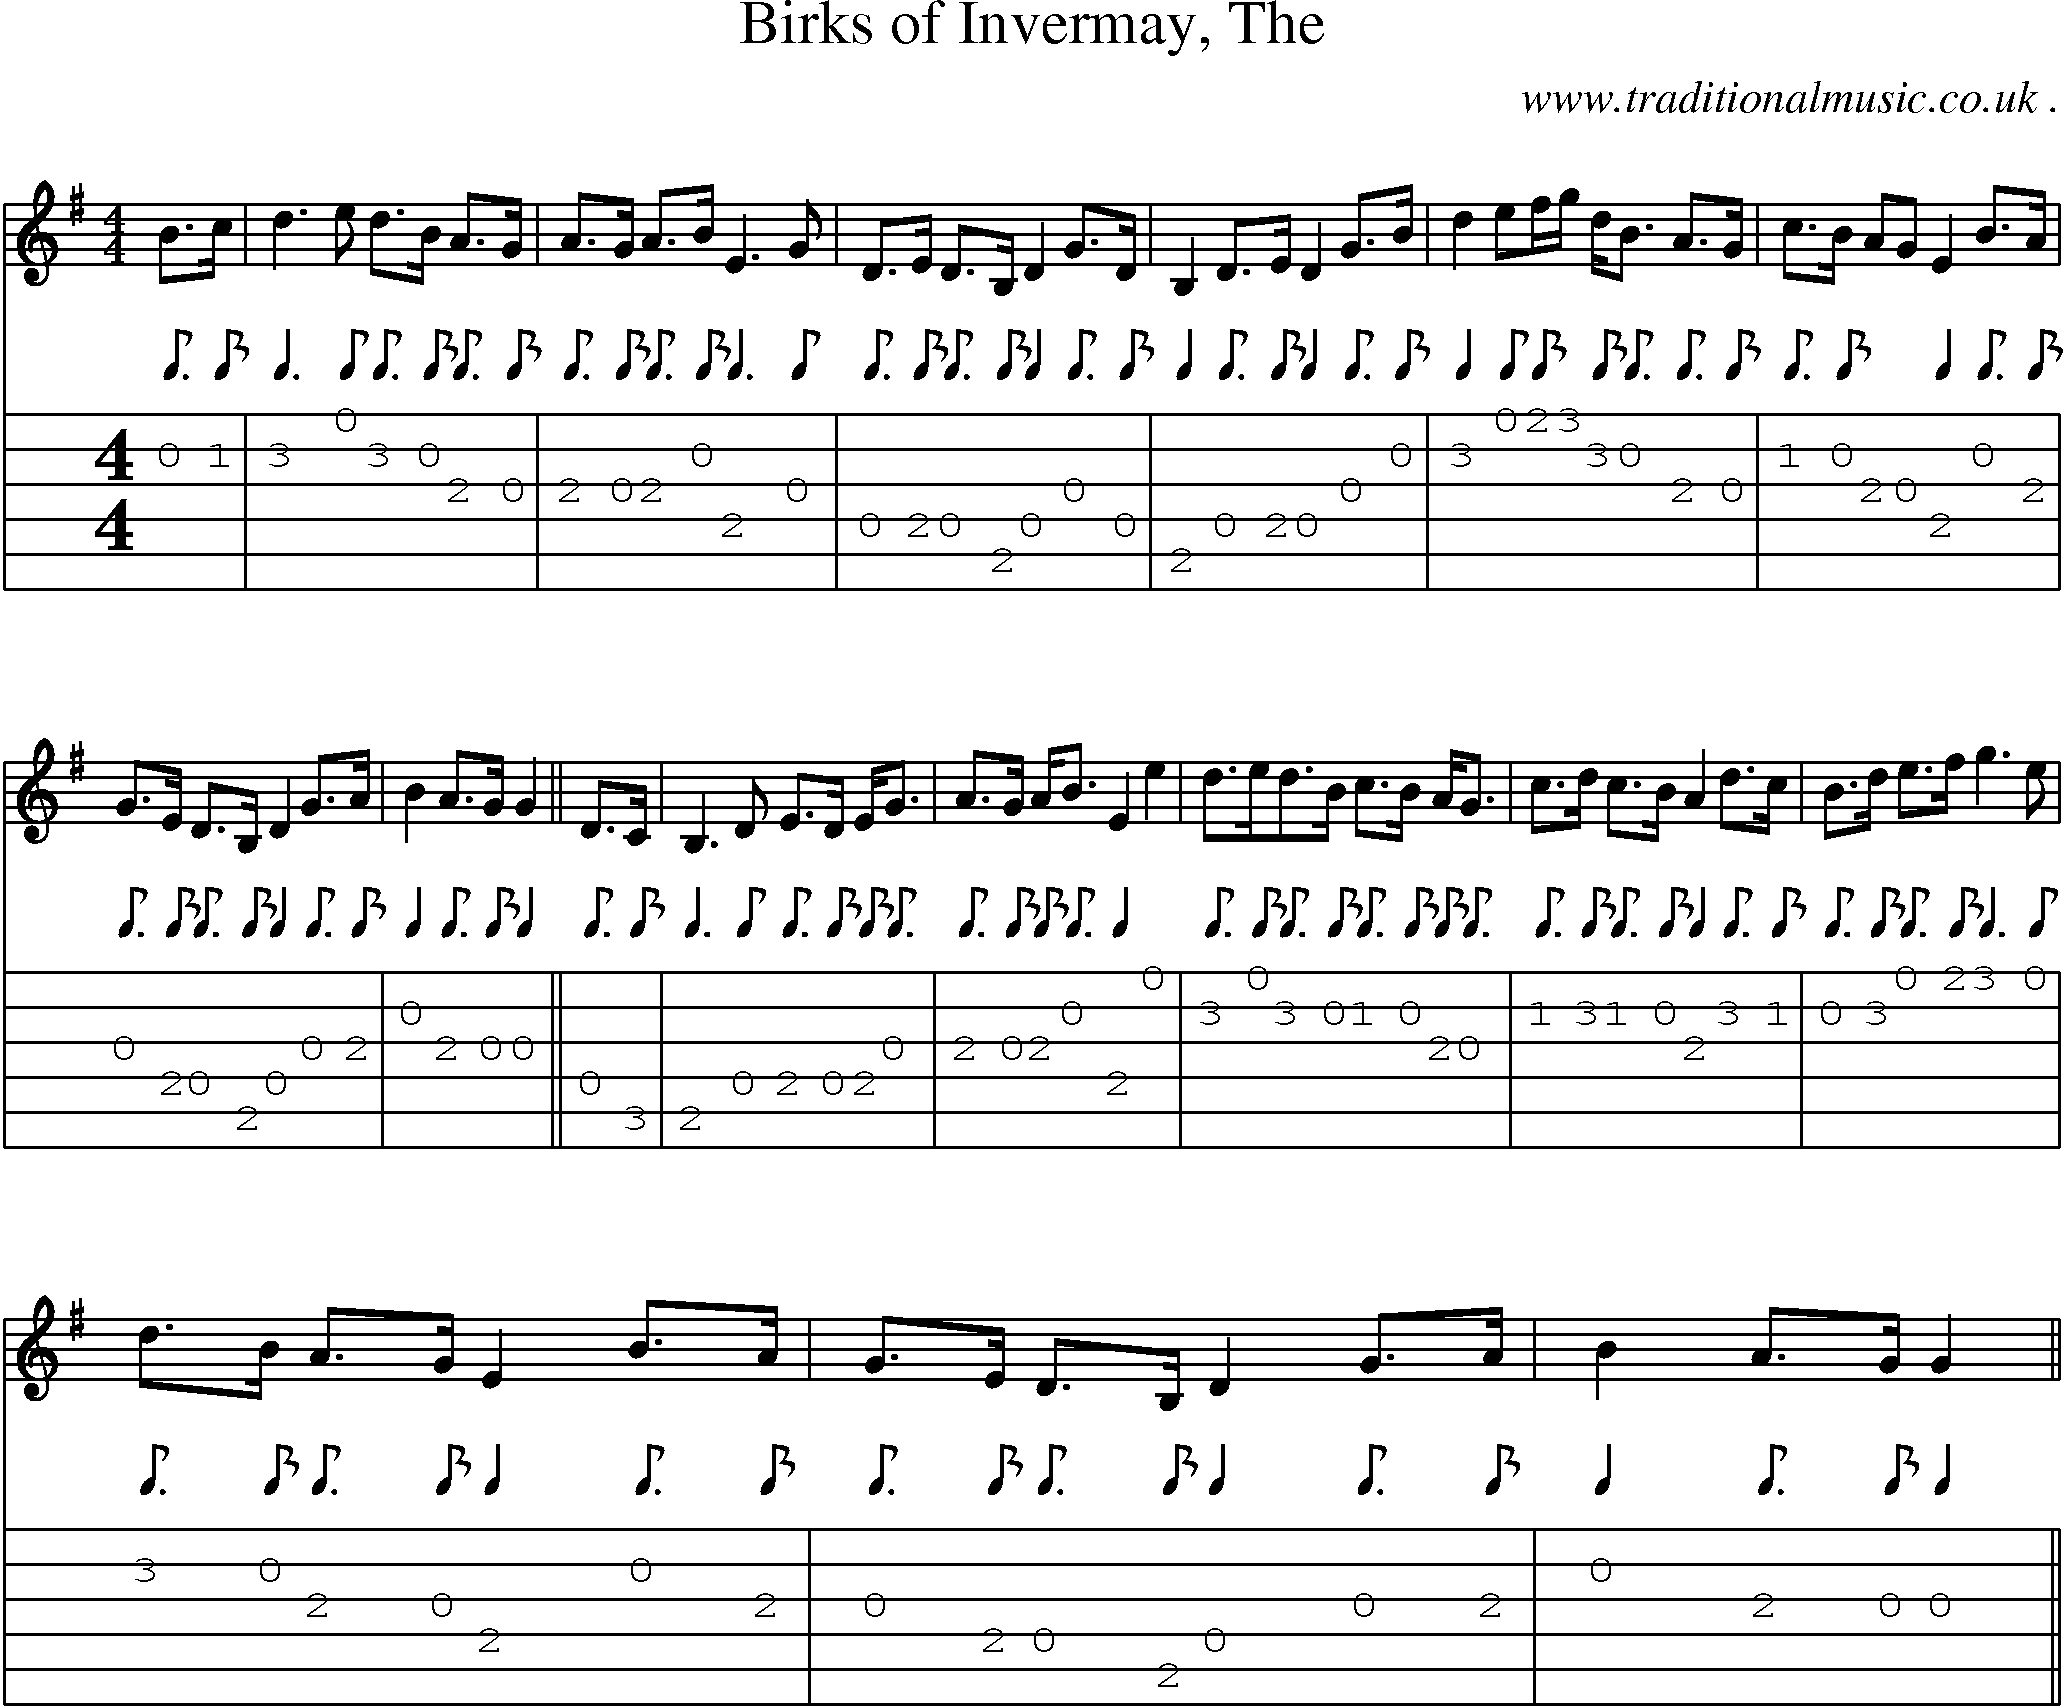 Sheet-music  score, Chords and Guitar Tabs for Birks Of Invermay The